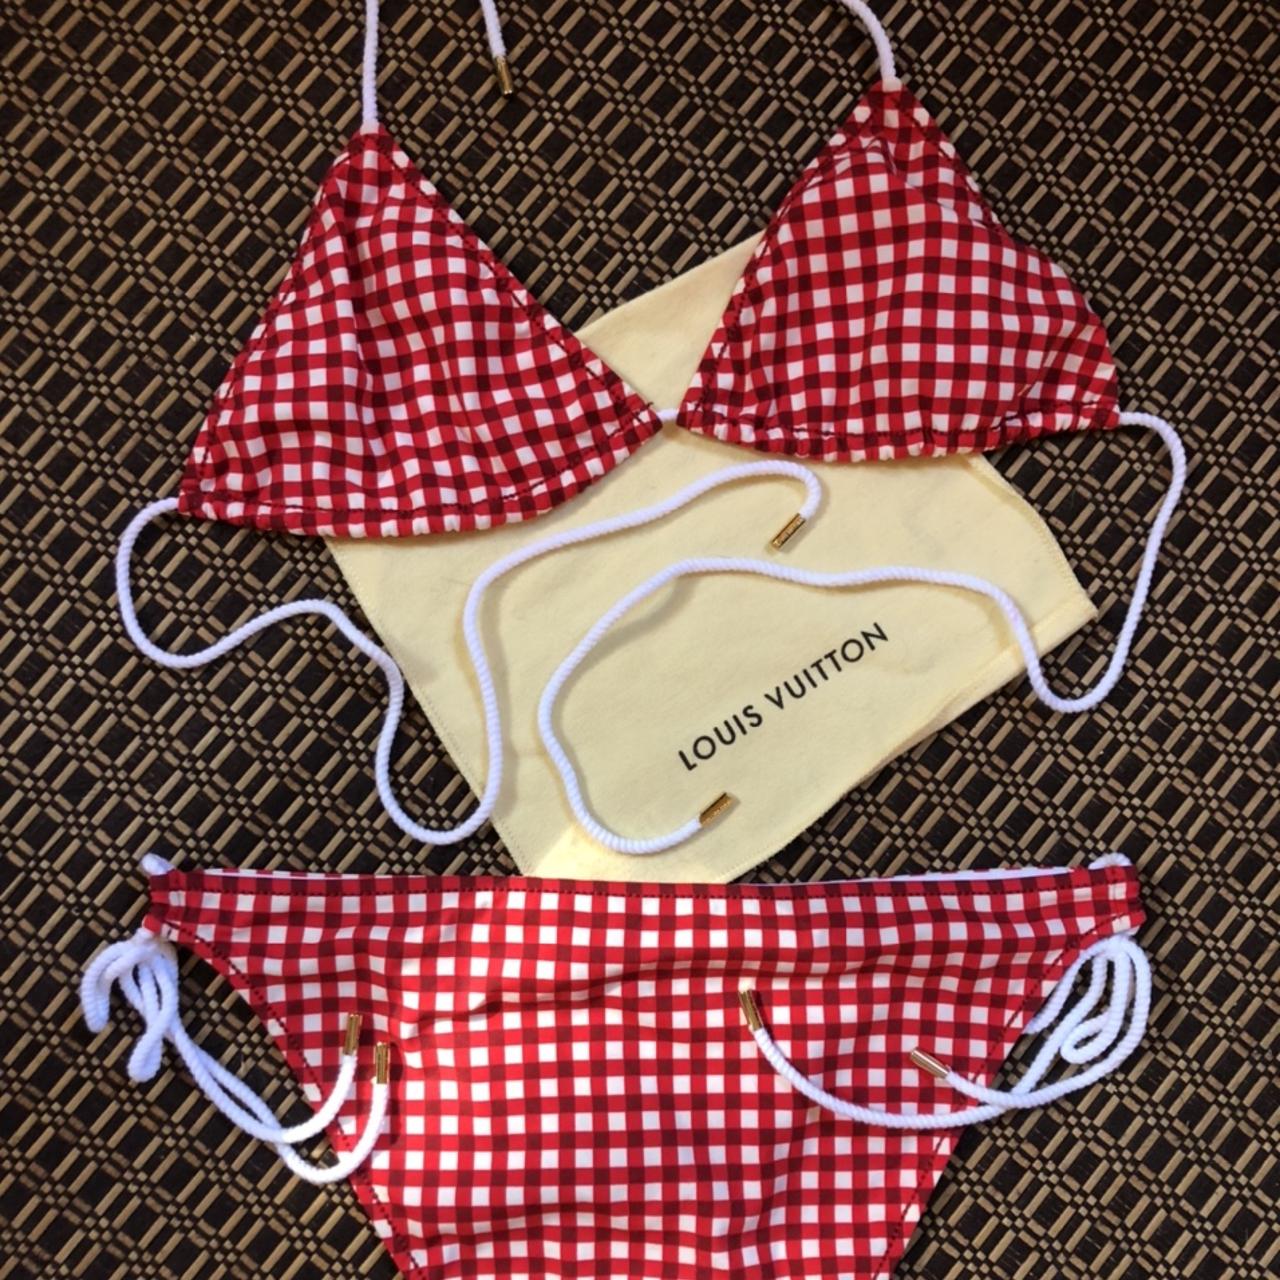 Two-piece swimsuit Louis Vuitton Red size 36 FR in Synthetic - 28282857